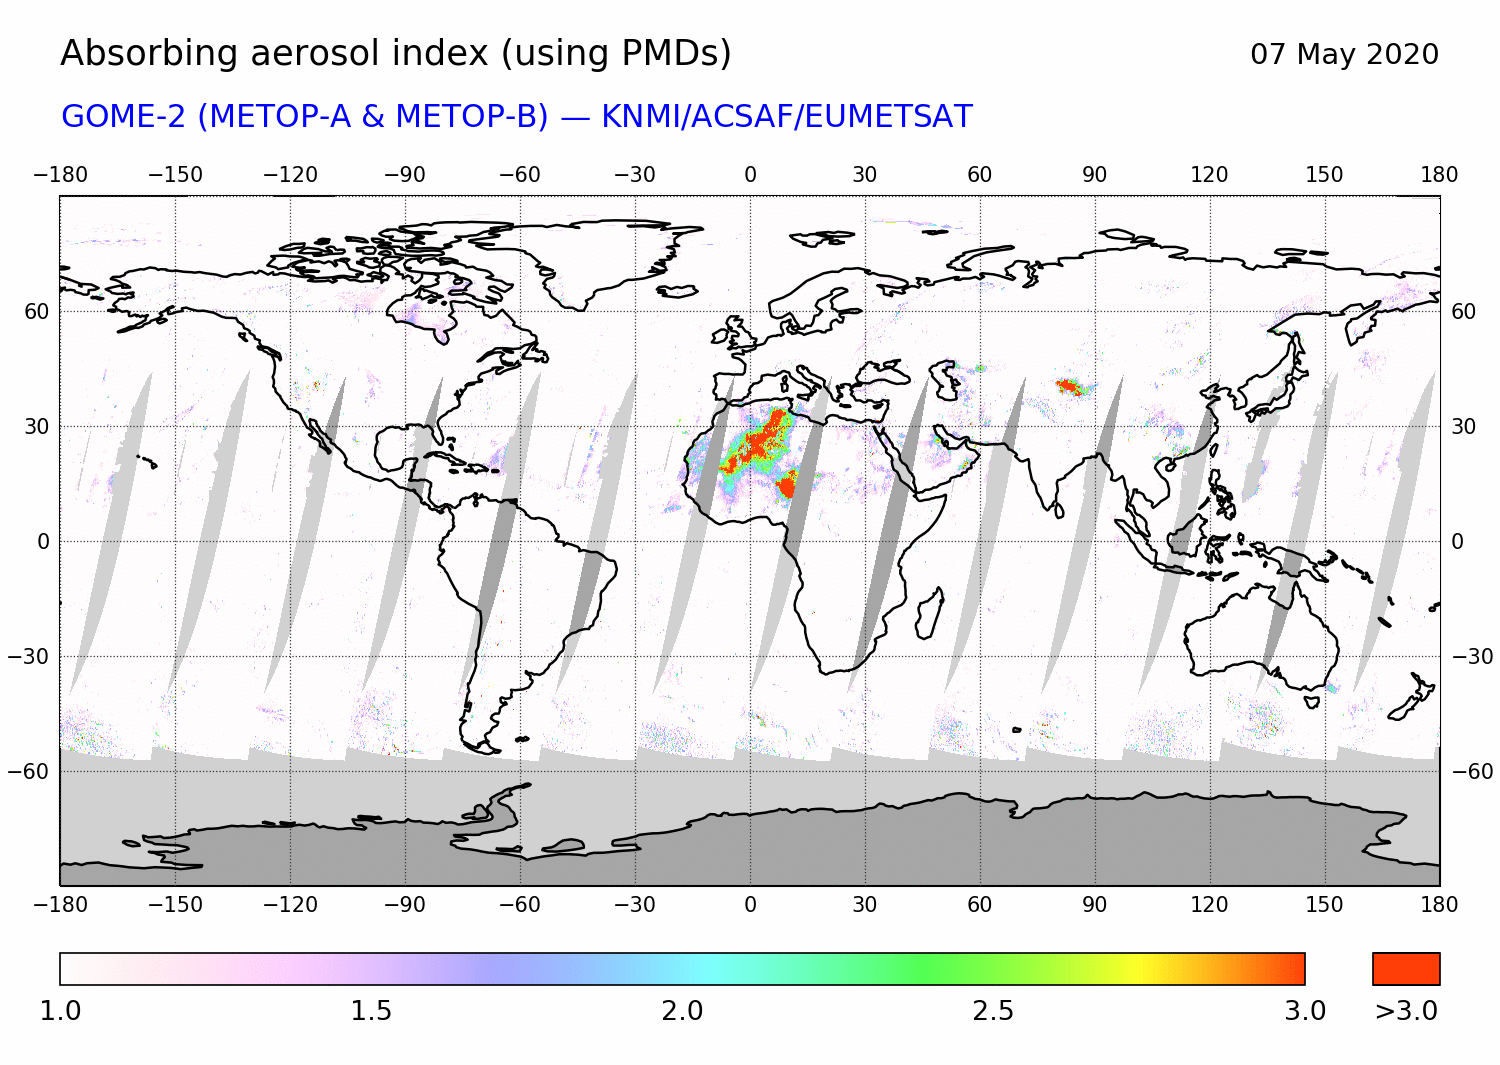 GOME-2 - Absorbing aerosol index of 07 May 2020